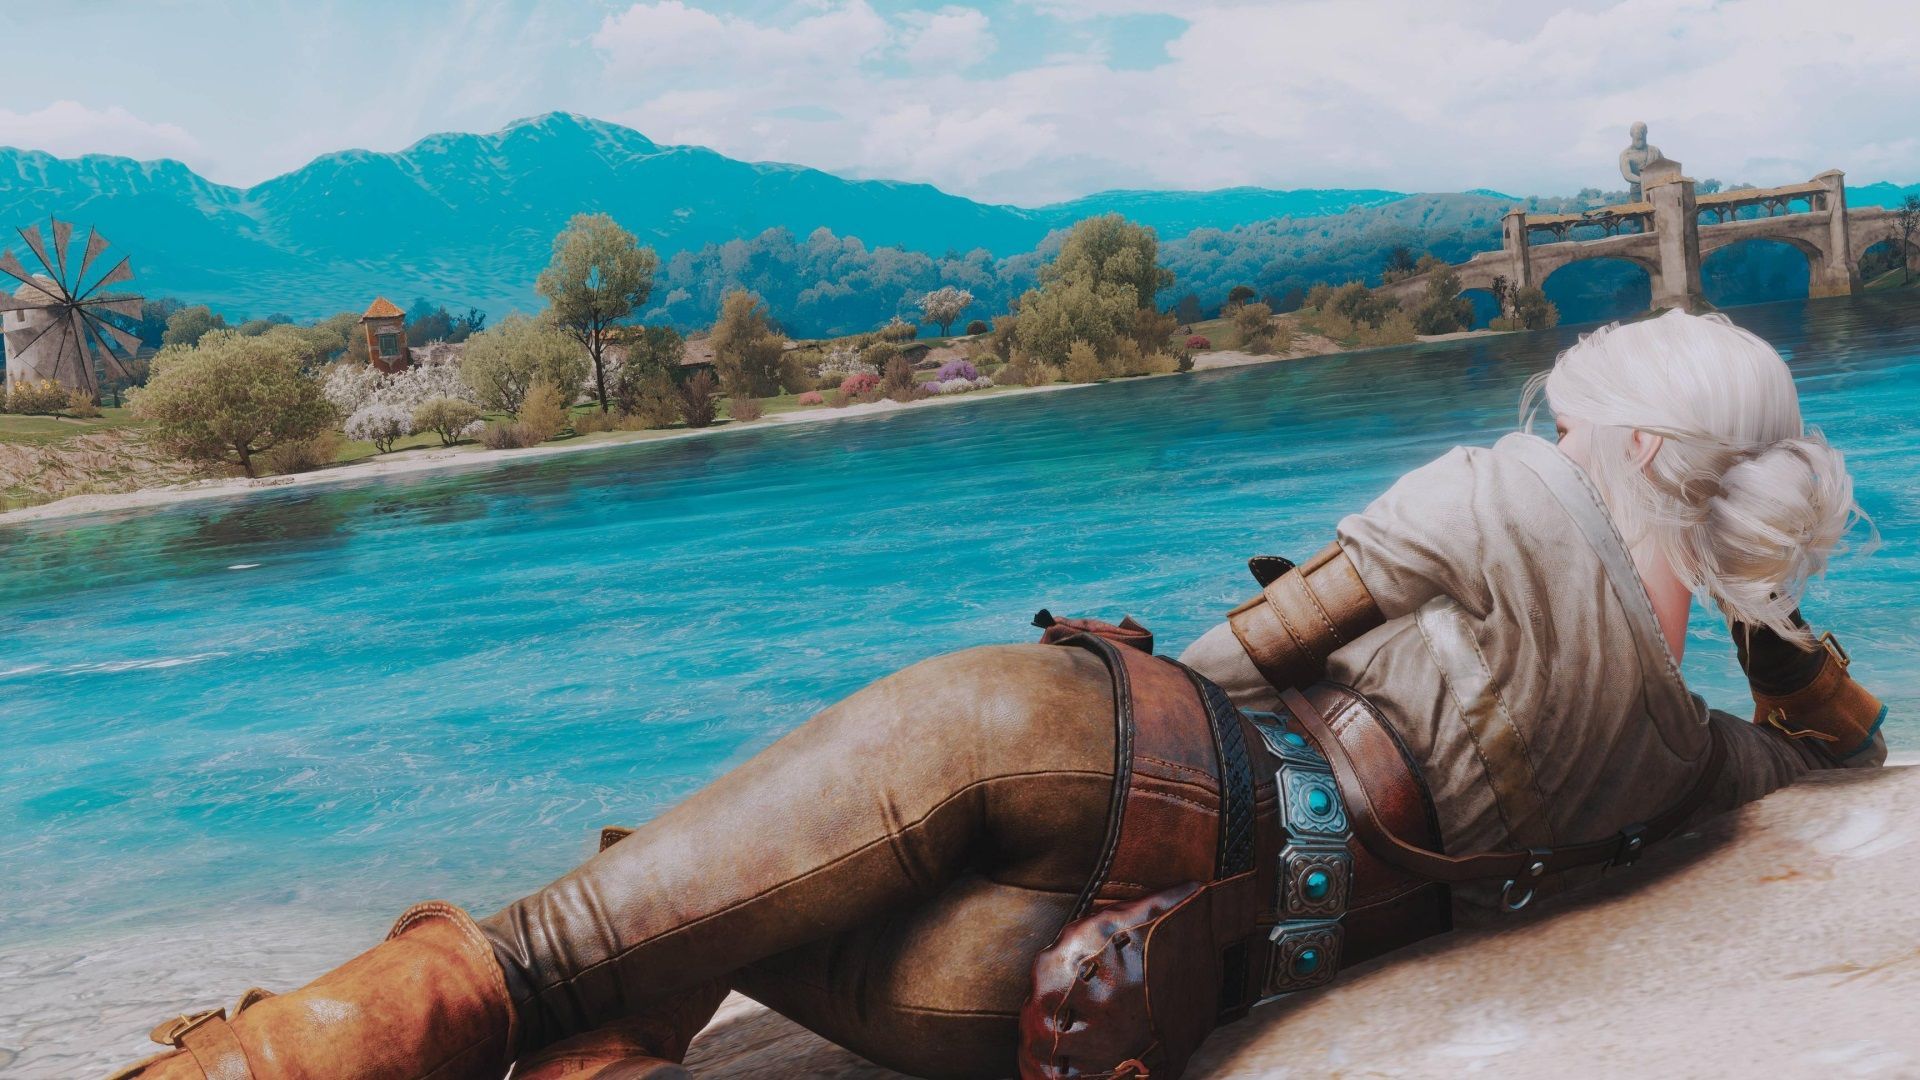 ciri wallpaper download free for pc HD. The witcher